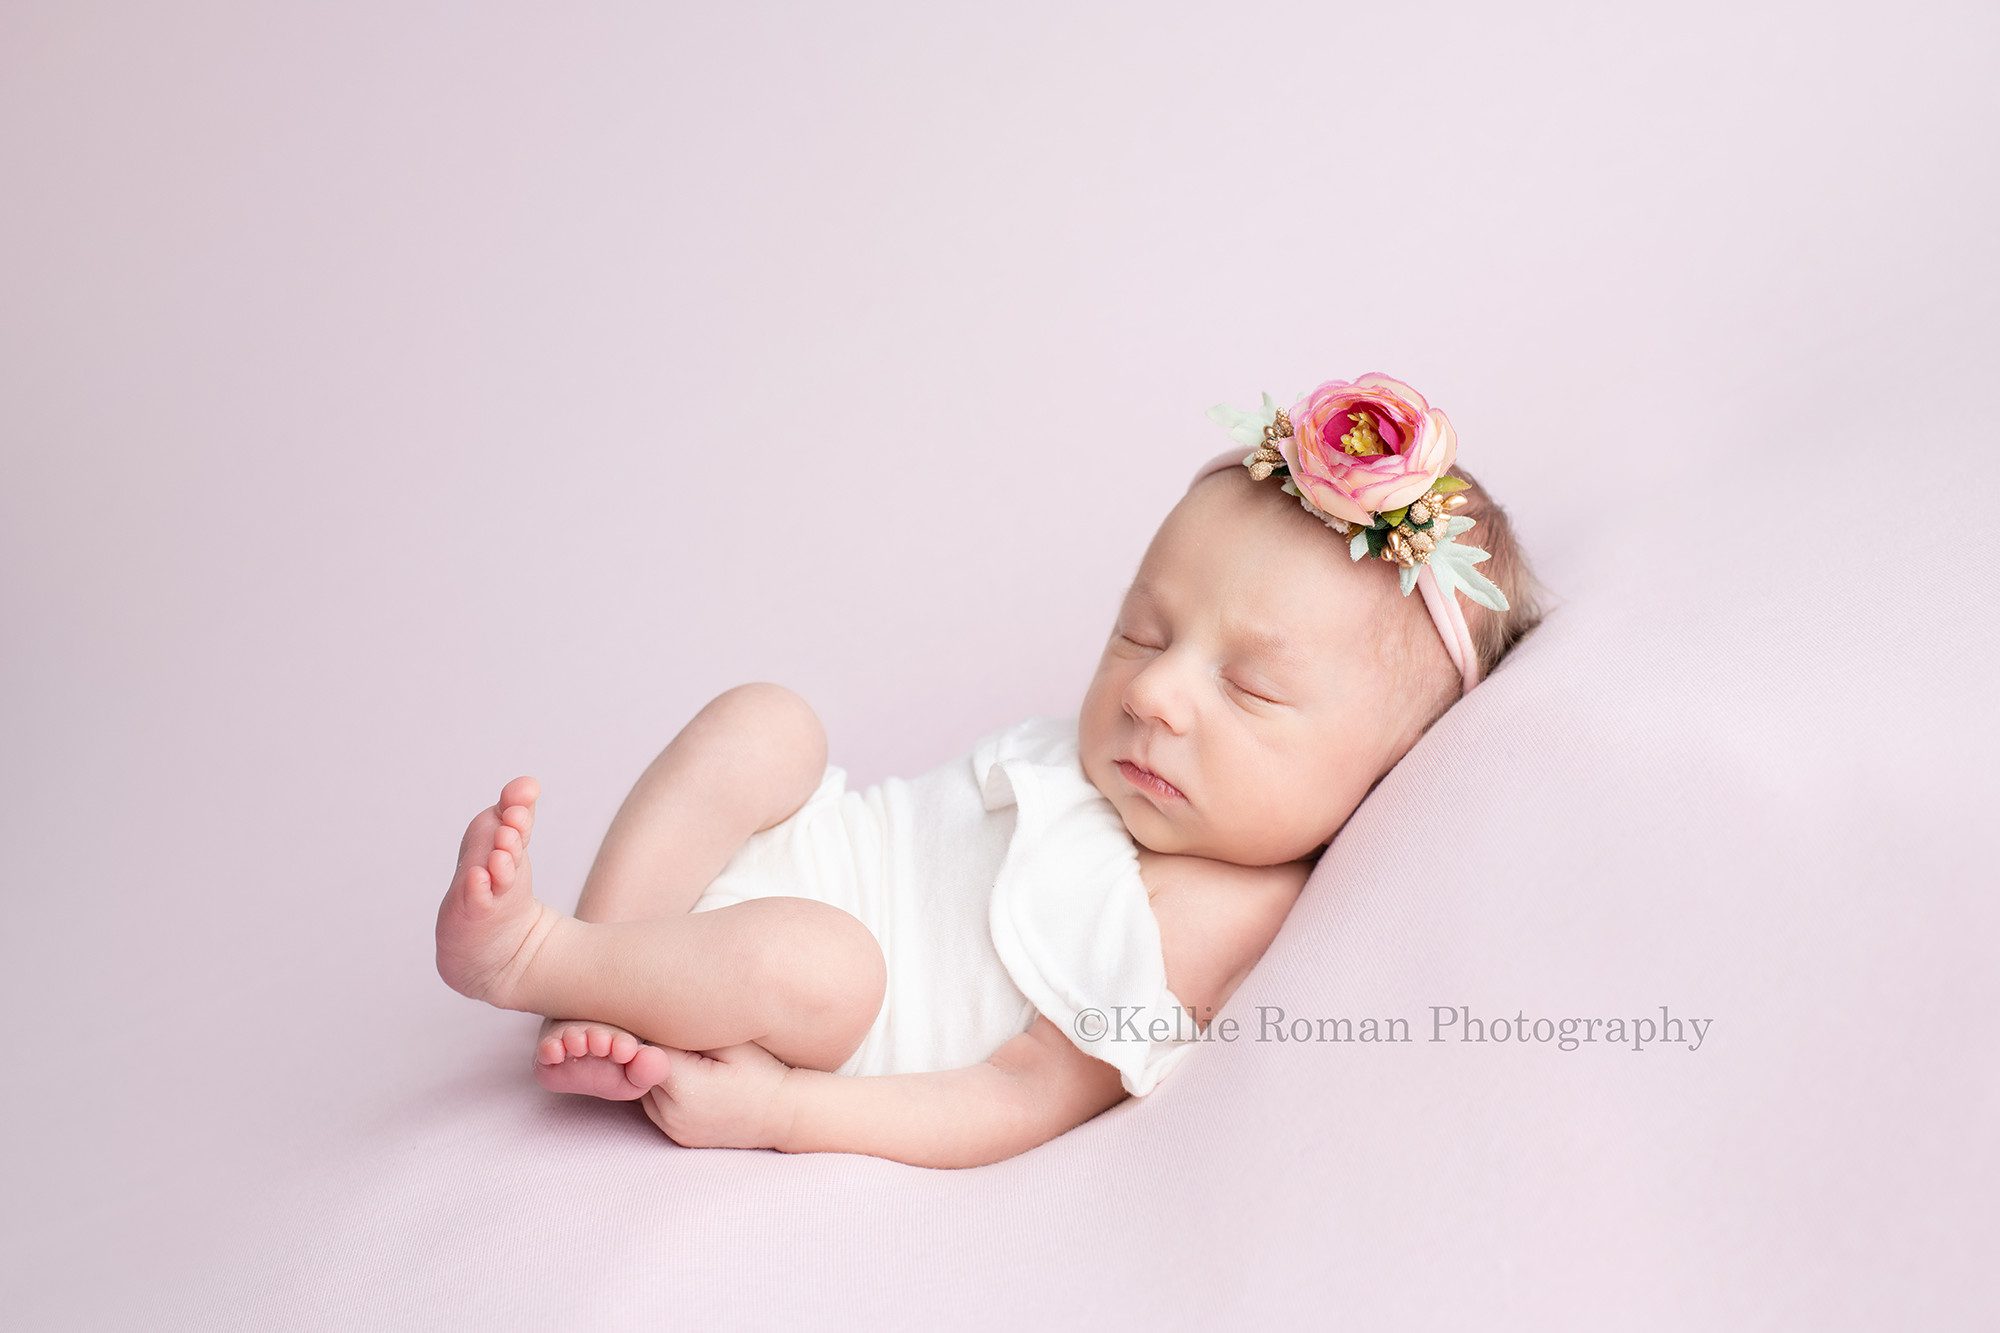 milwaukee baby whisperer a newborn baby girl in a greendale photographers studio she is sleeping while laying on her back wearing a white romper and a purple flower headband. She's laying on a pink fabric and is very relaxed.